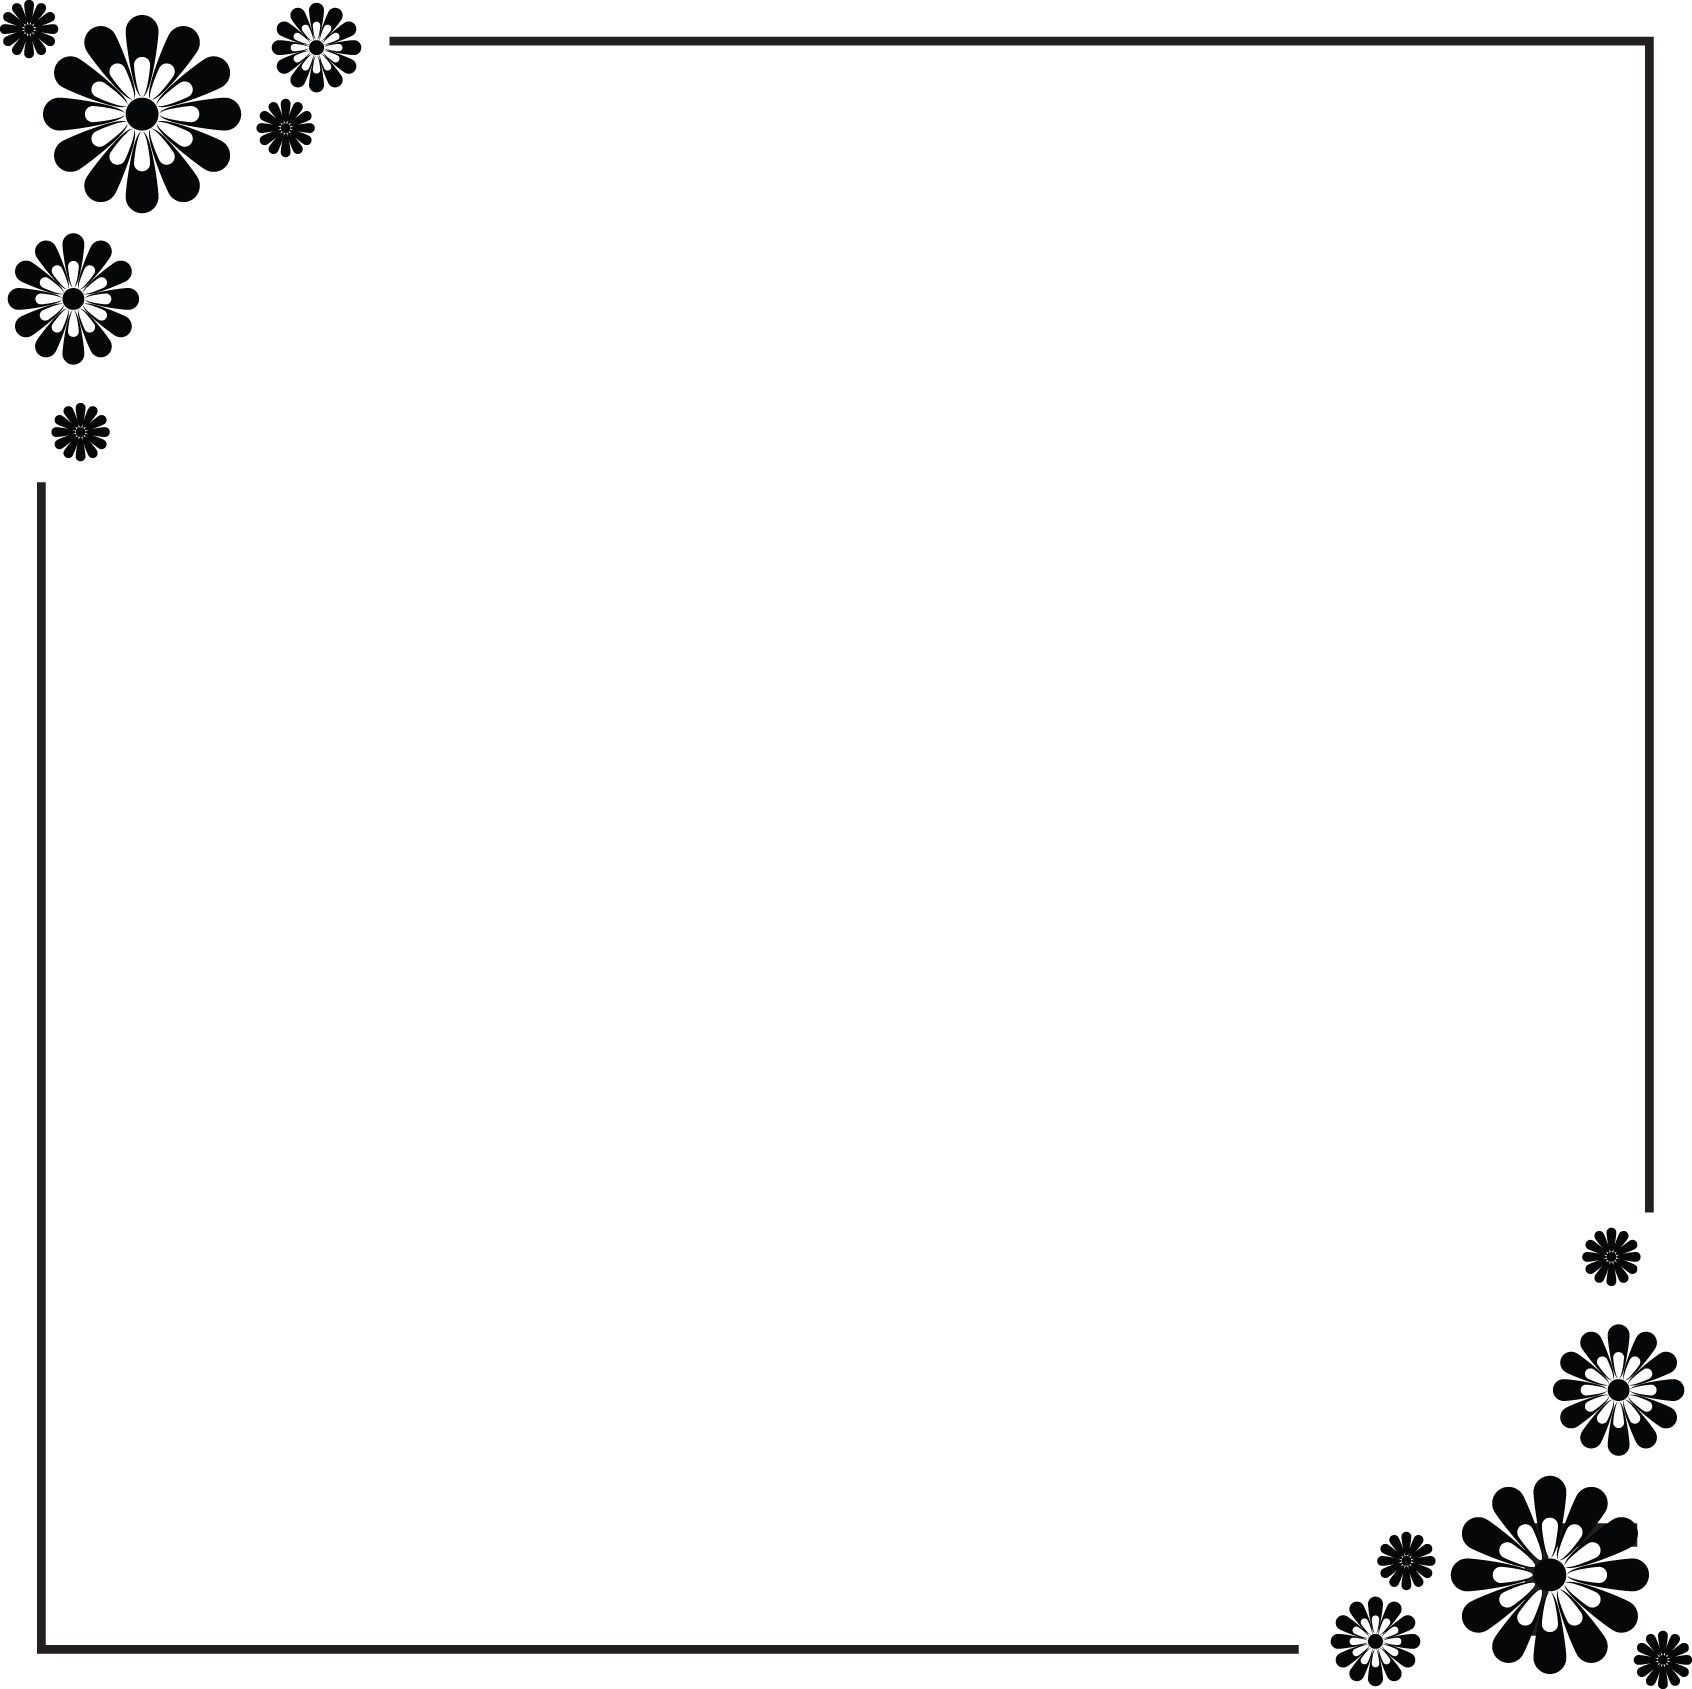 Free Page Border Design For A4 Size Paper